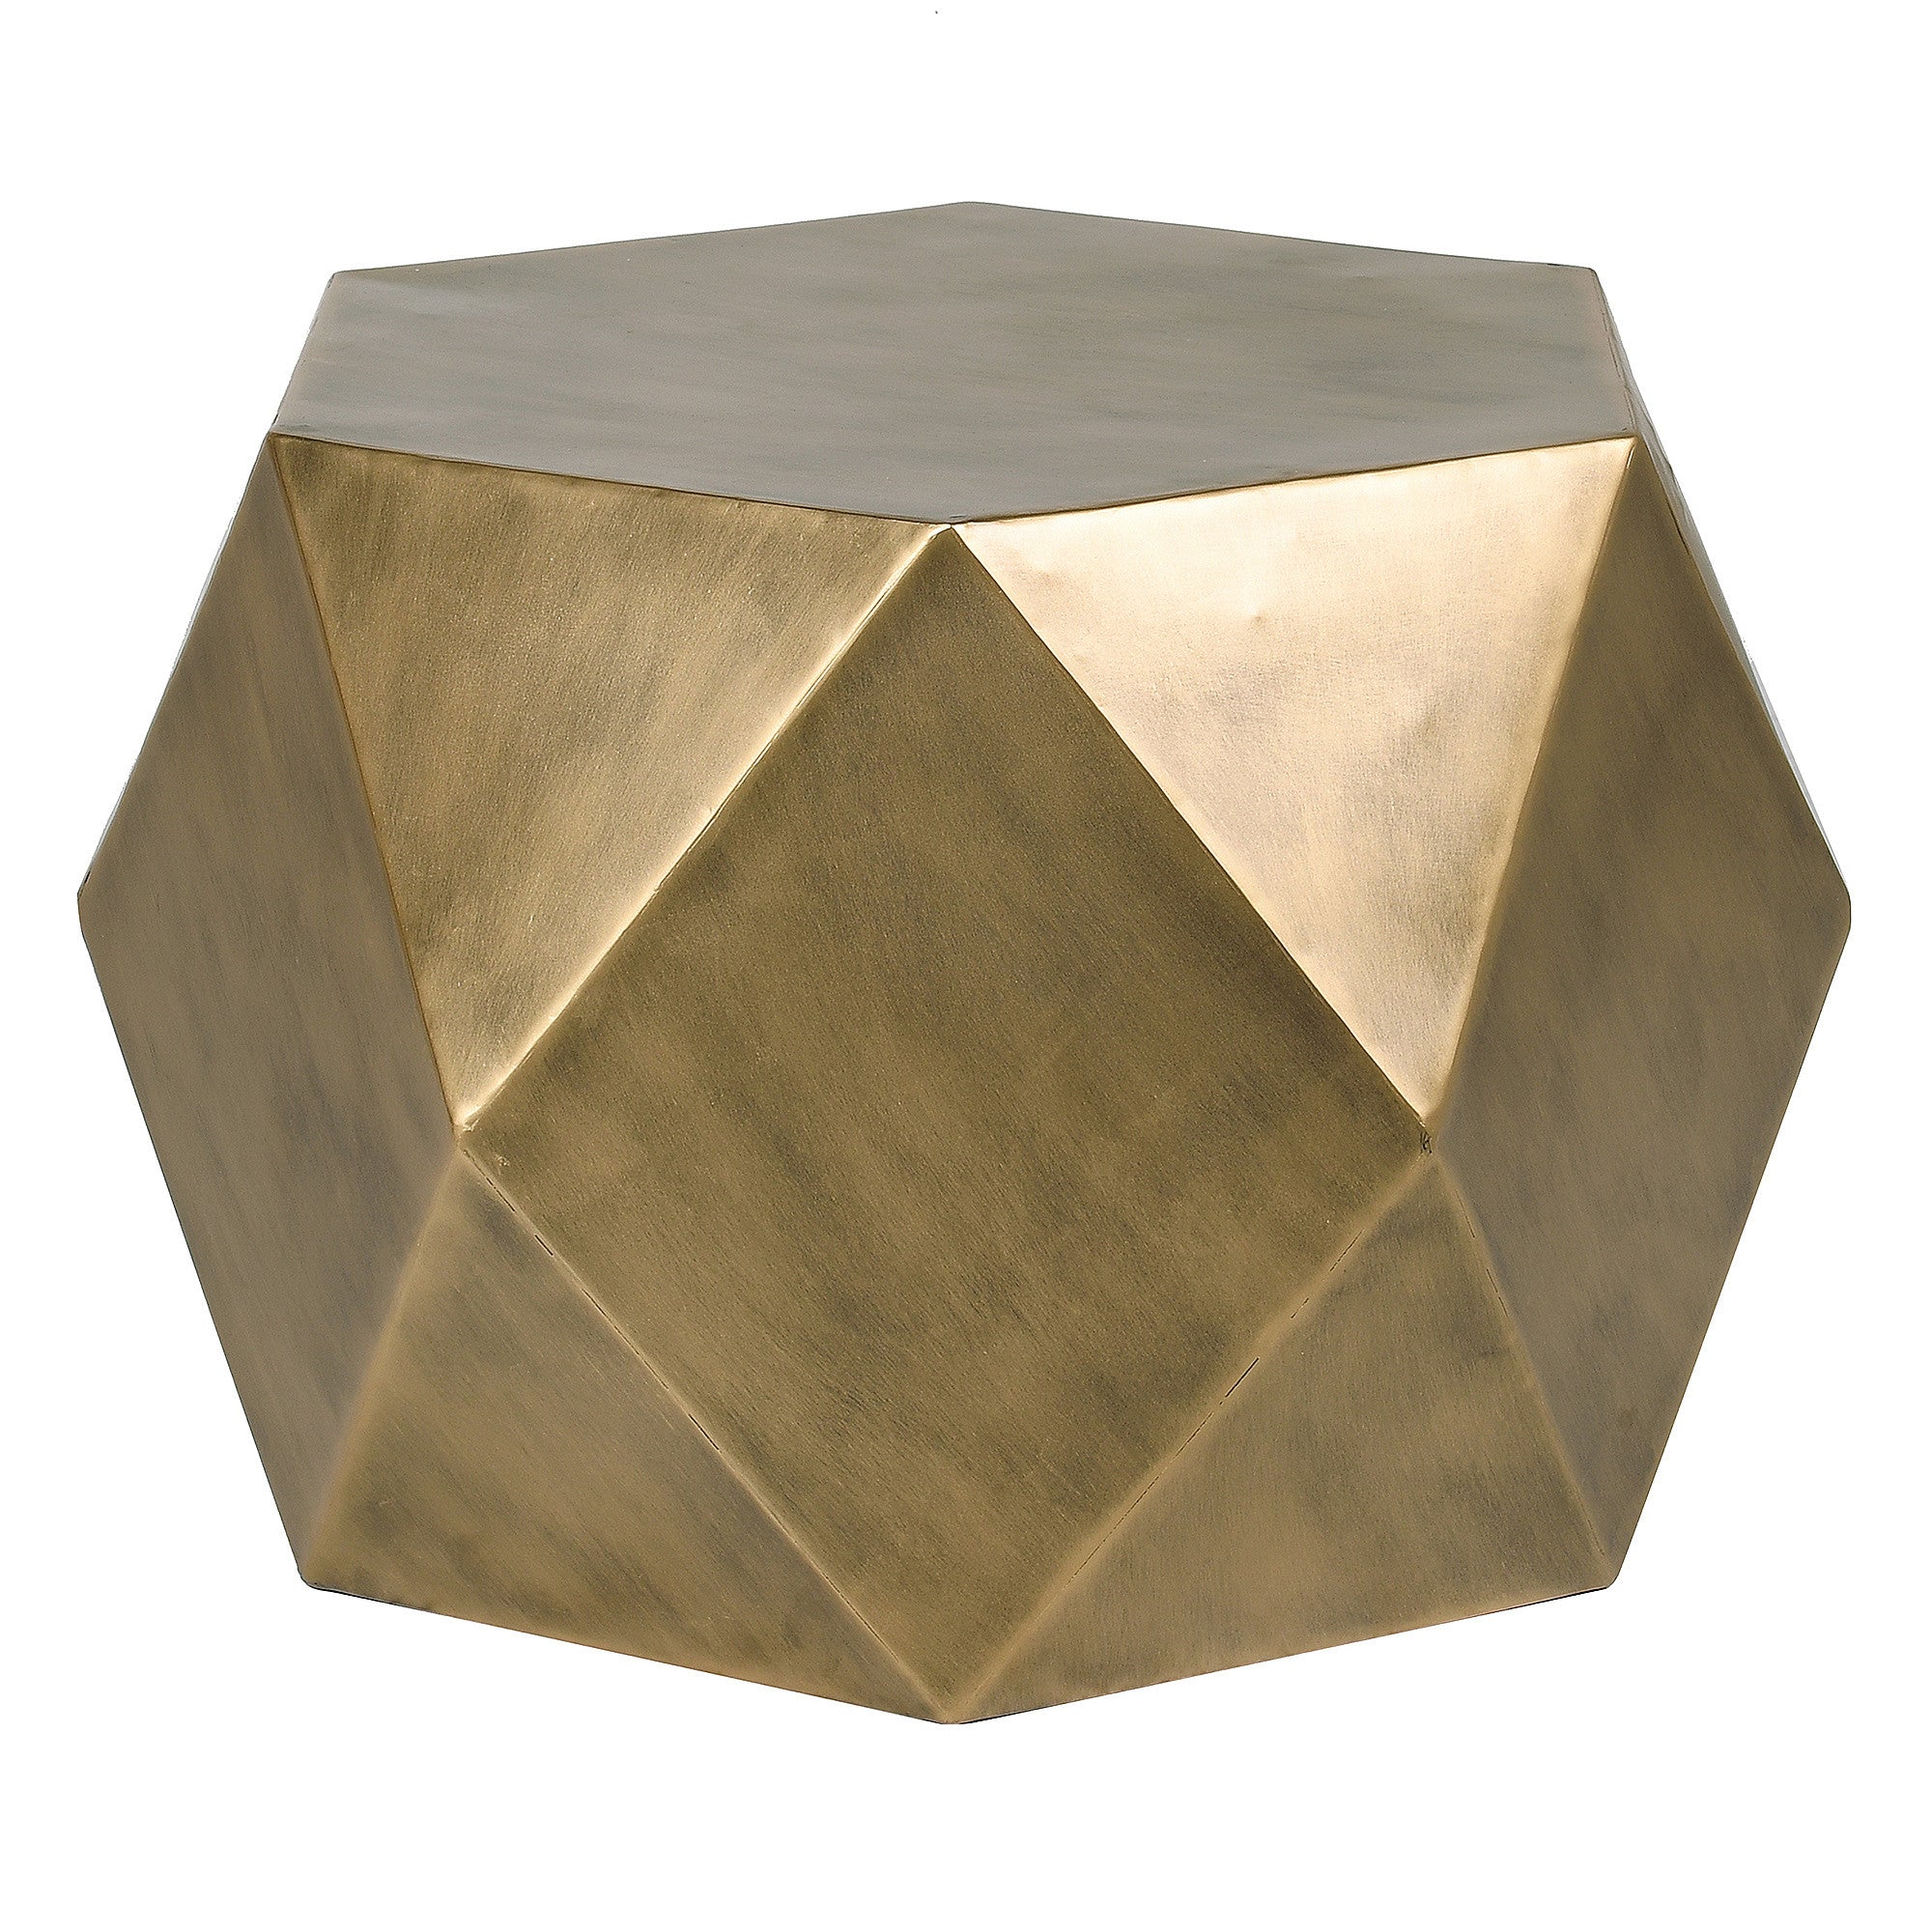 Gold Metal Hexagonal Side Table (Second - B)